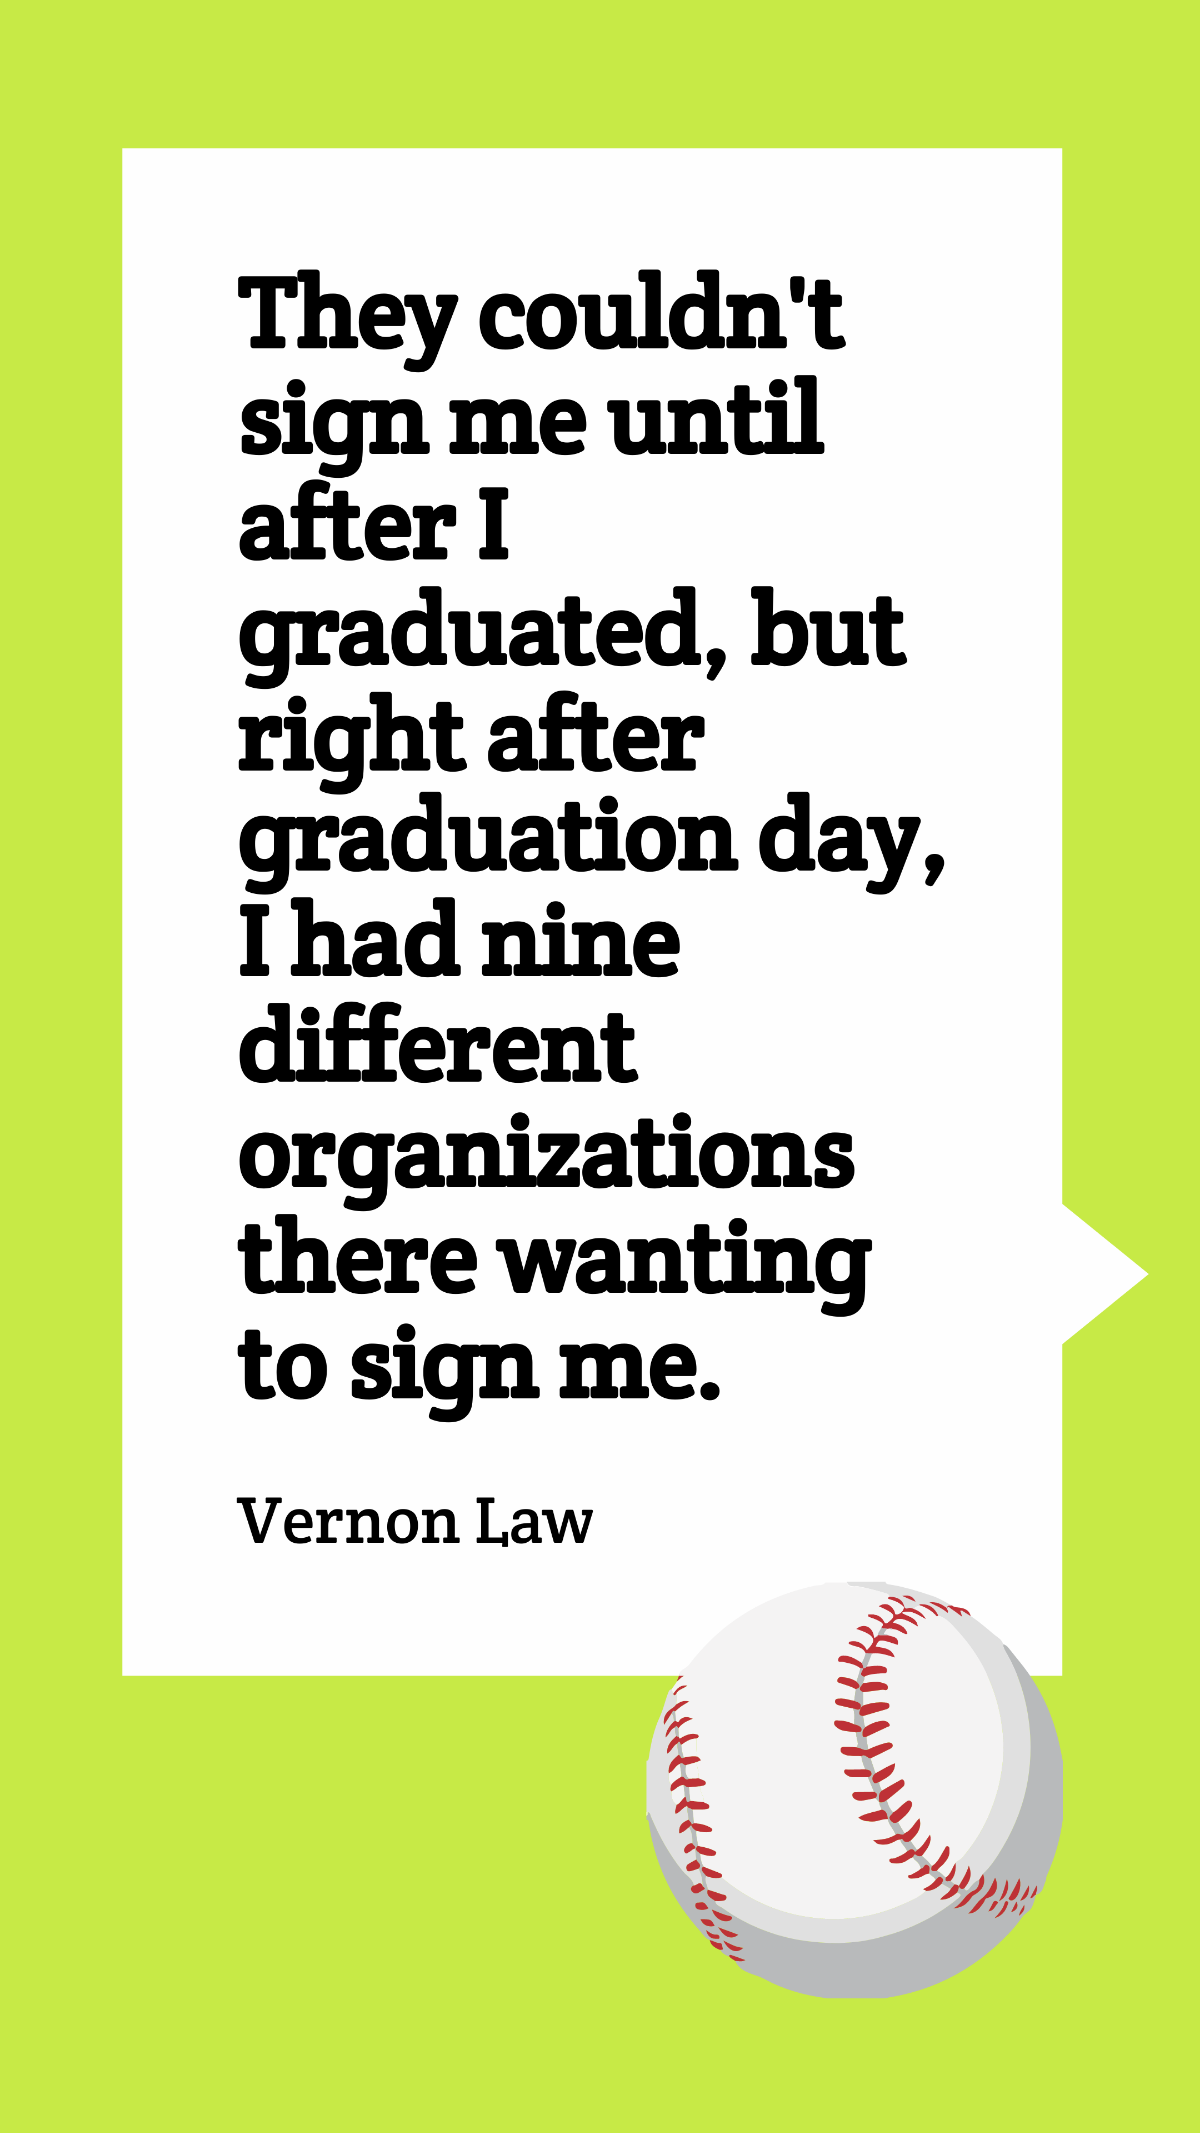 Vernon Law - They couldn't sign me until after I graduated, but right after graduation day, I had nine different organizations there wanting to sign me.